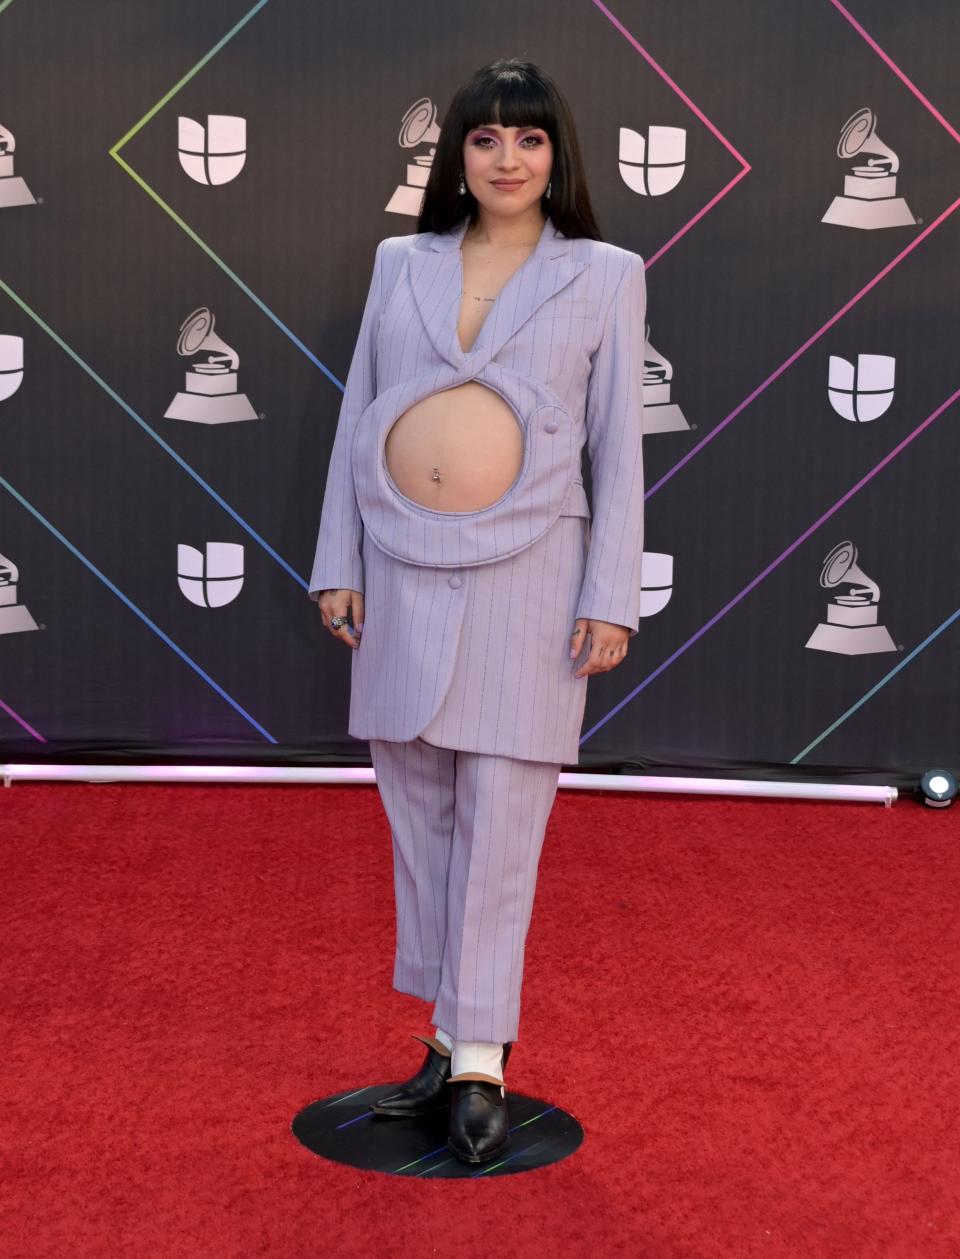 <p>Chilean singer Mon Laferte presented the world with her take on maternity red carpet fashion by wearing a lilac suit featuring a hole that completely exposed her baby bump. The bold styling was a hit with her fans, with one writing on social media: "Loved Mon Laferte's baby bump reveal. Flawless queen". (Getty Images)</p> 